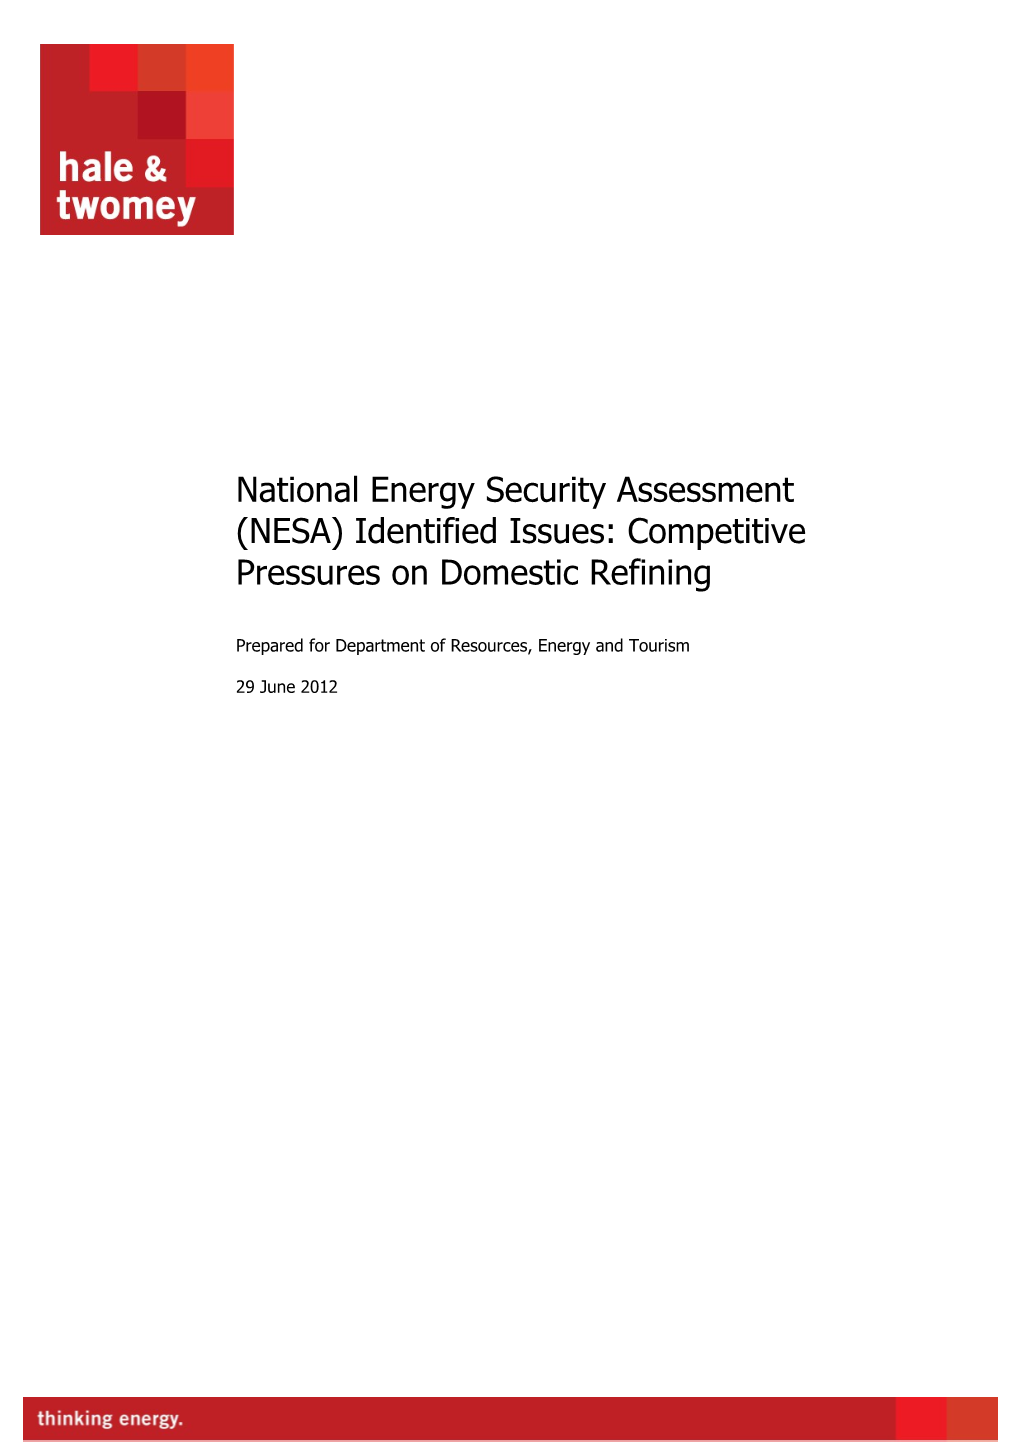 National Energy Security Assessment - Competitive Pressures on Domestic Refining, 2012